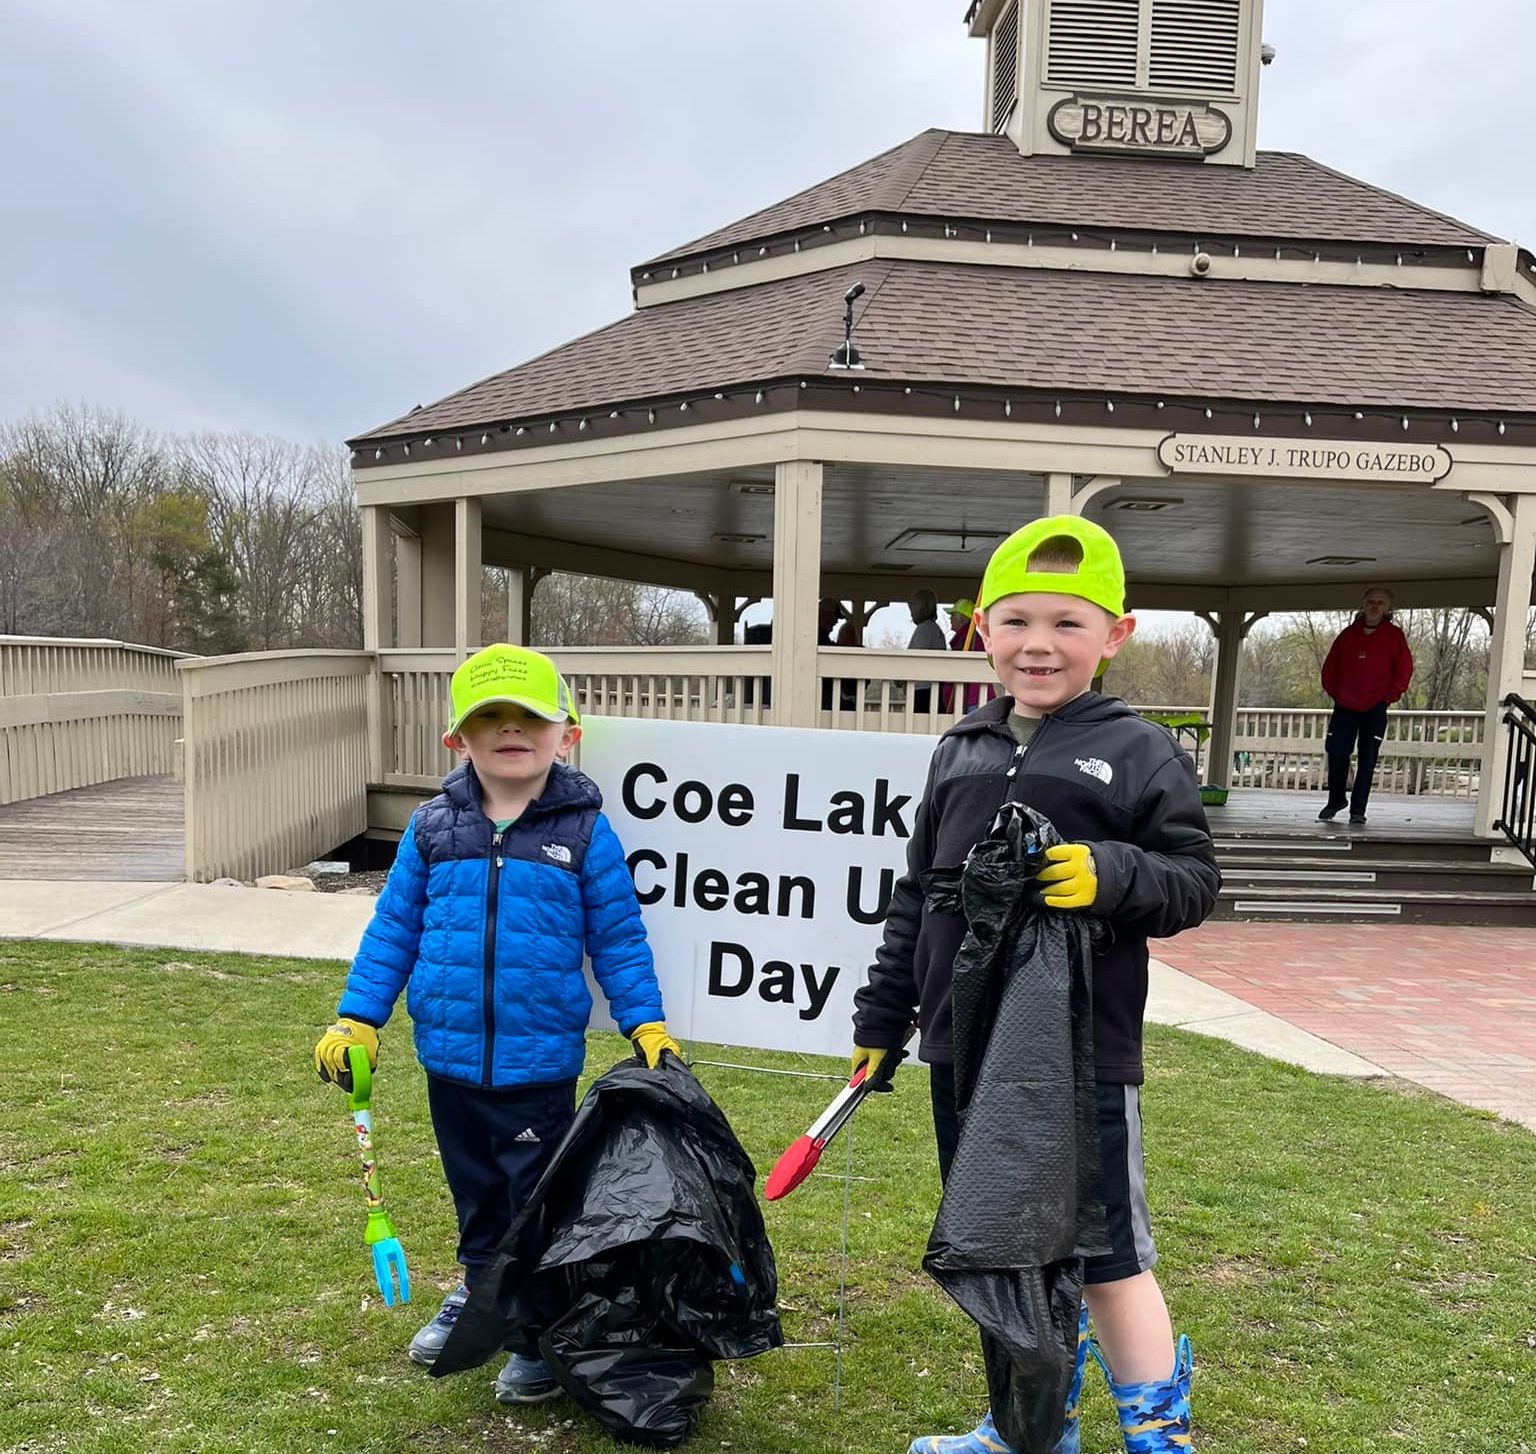 thank-you-we-love-the-coe-lake-clean-up